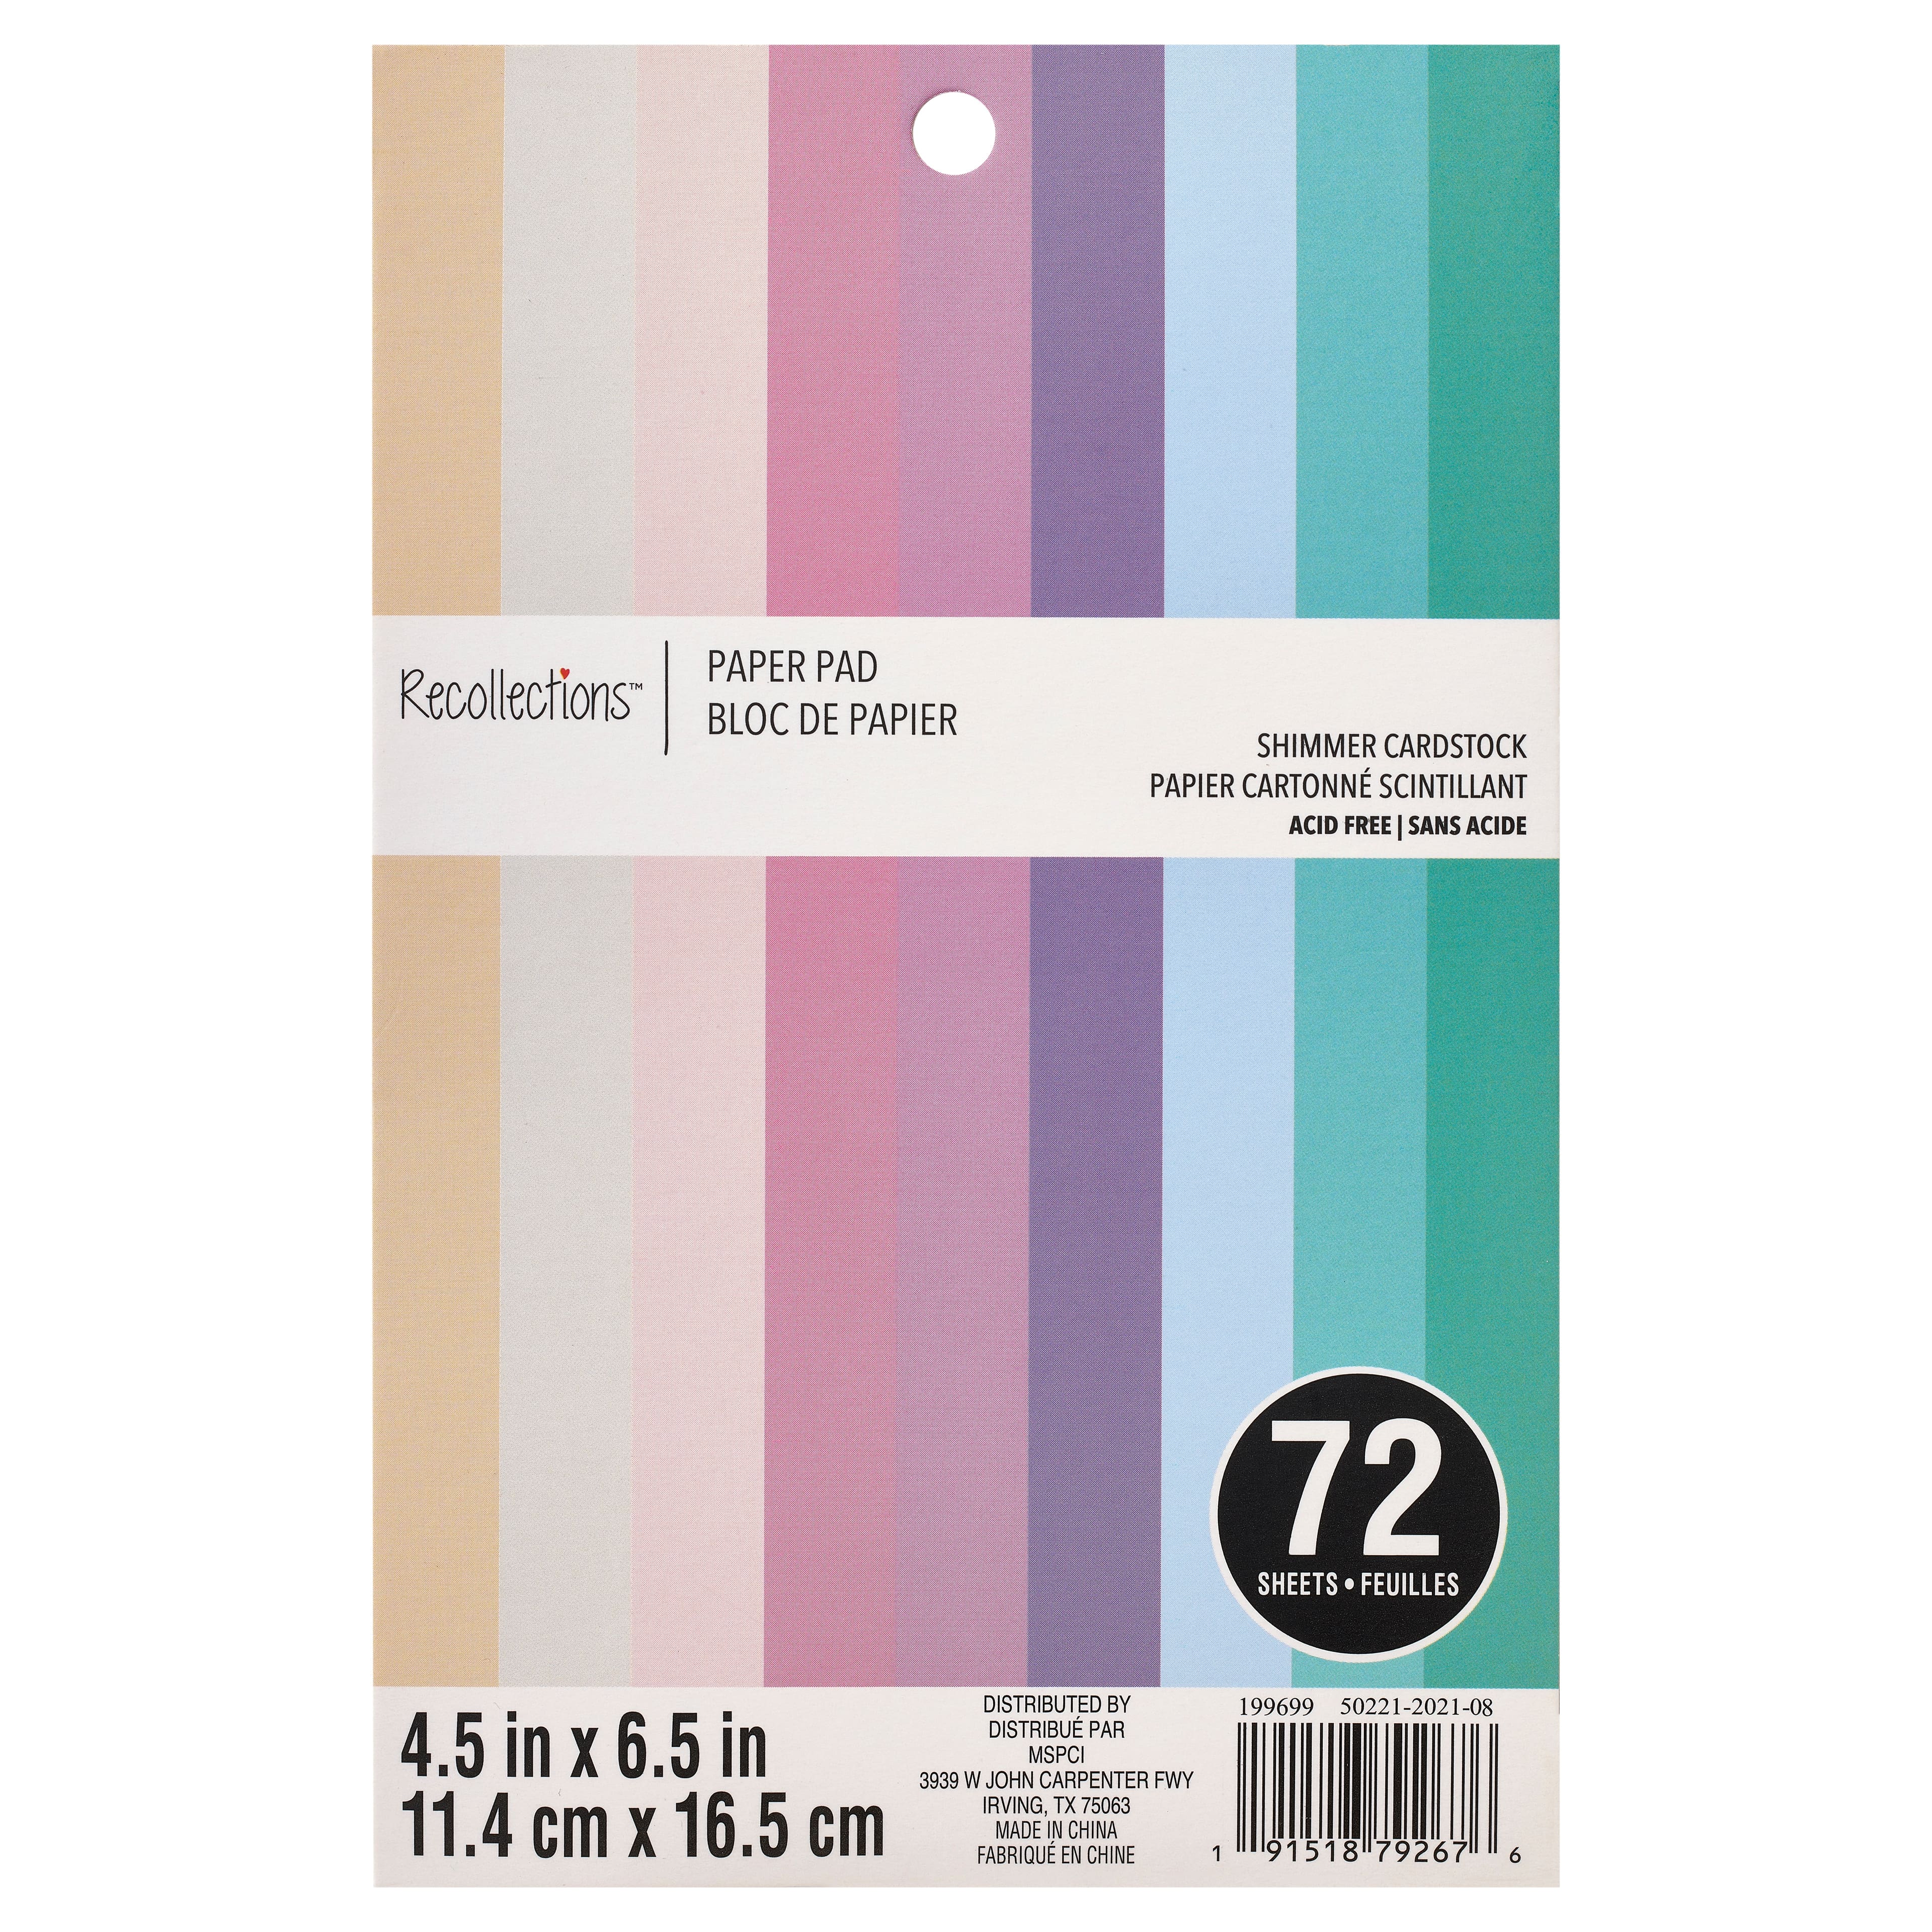 Ditsy Floral Paper Pad by Recollections™, 6 x 6